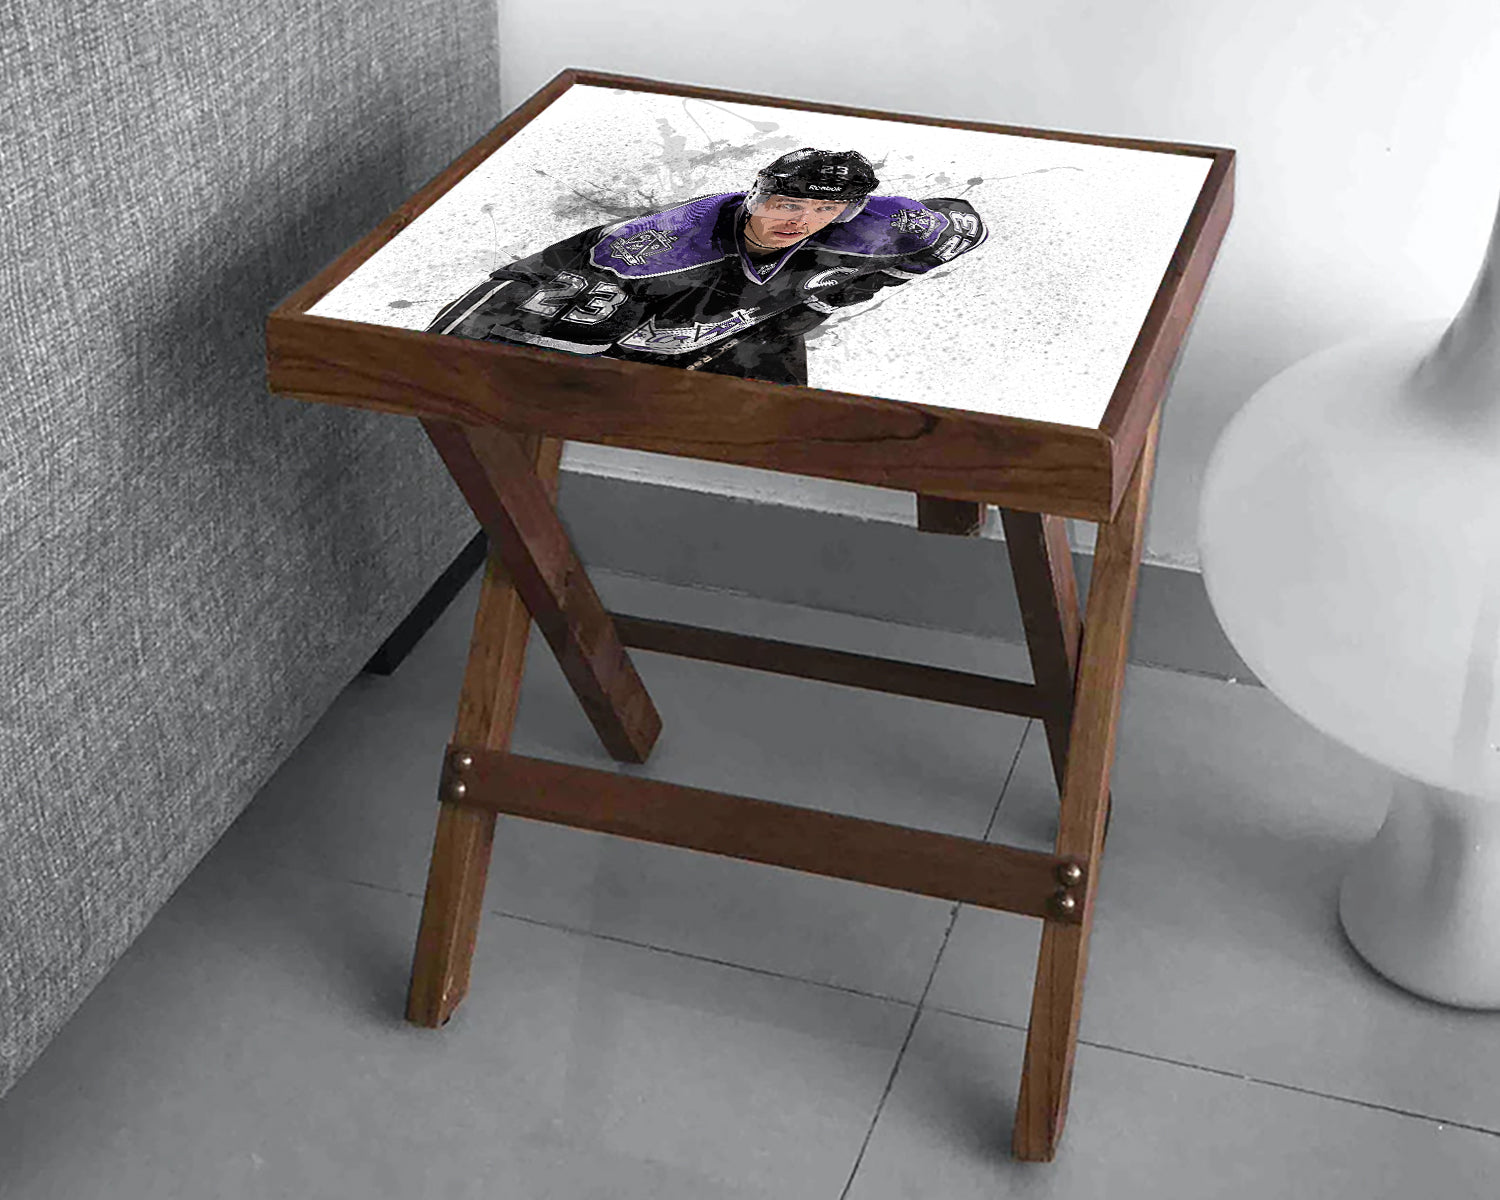 Dustin Wolf Splash Effect Coffee and Laptop Table 